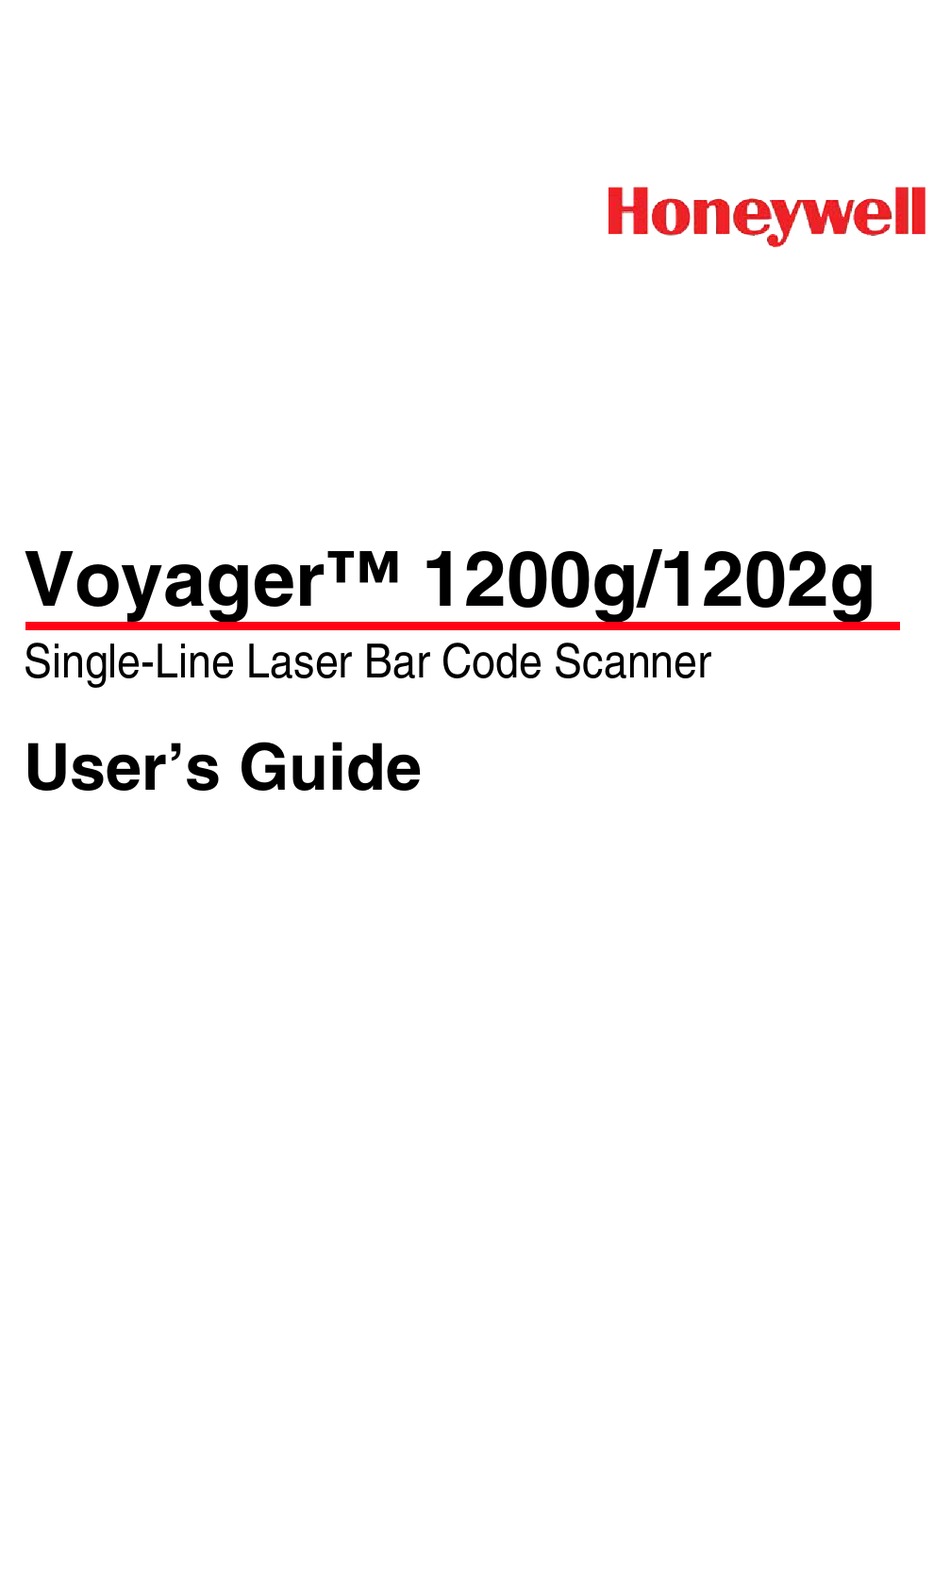 voyager 1200g quick start guide